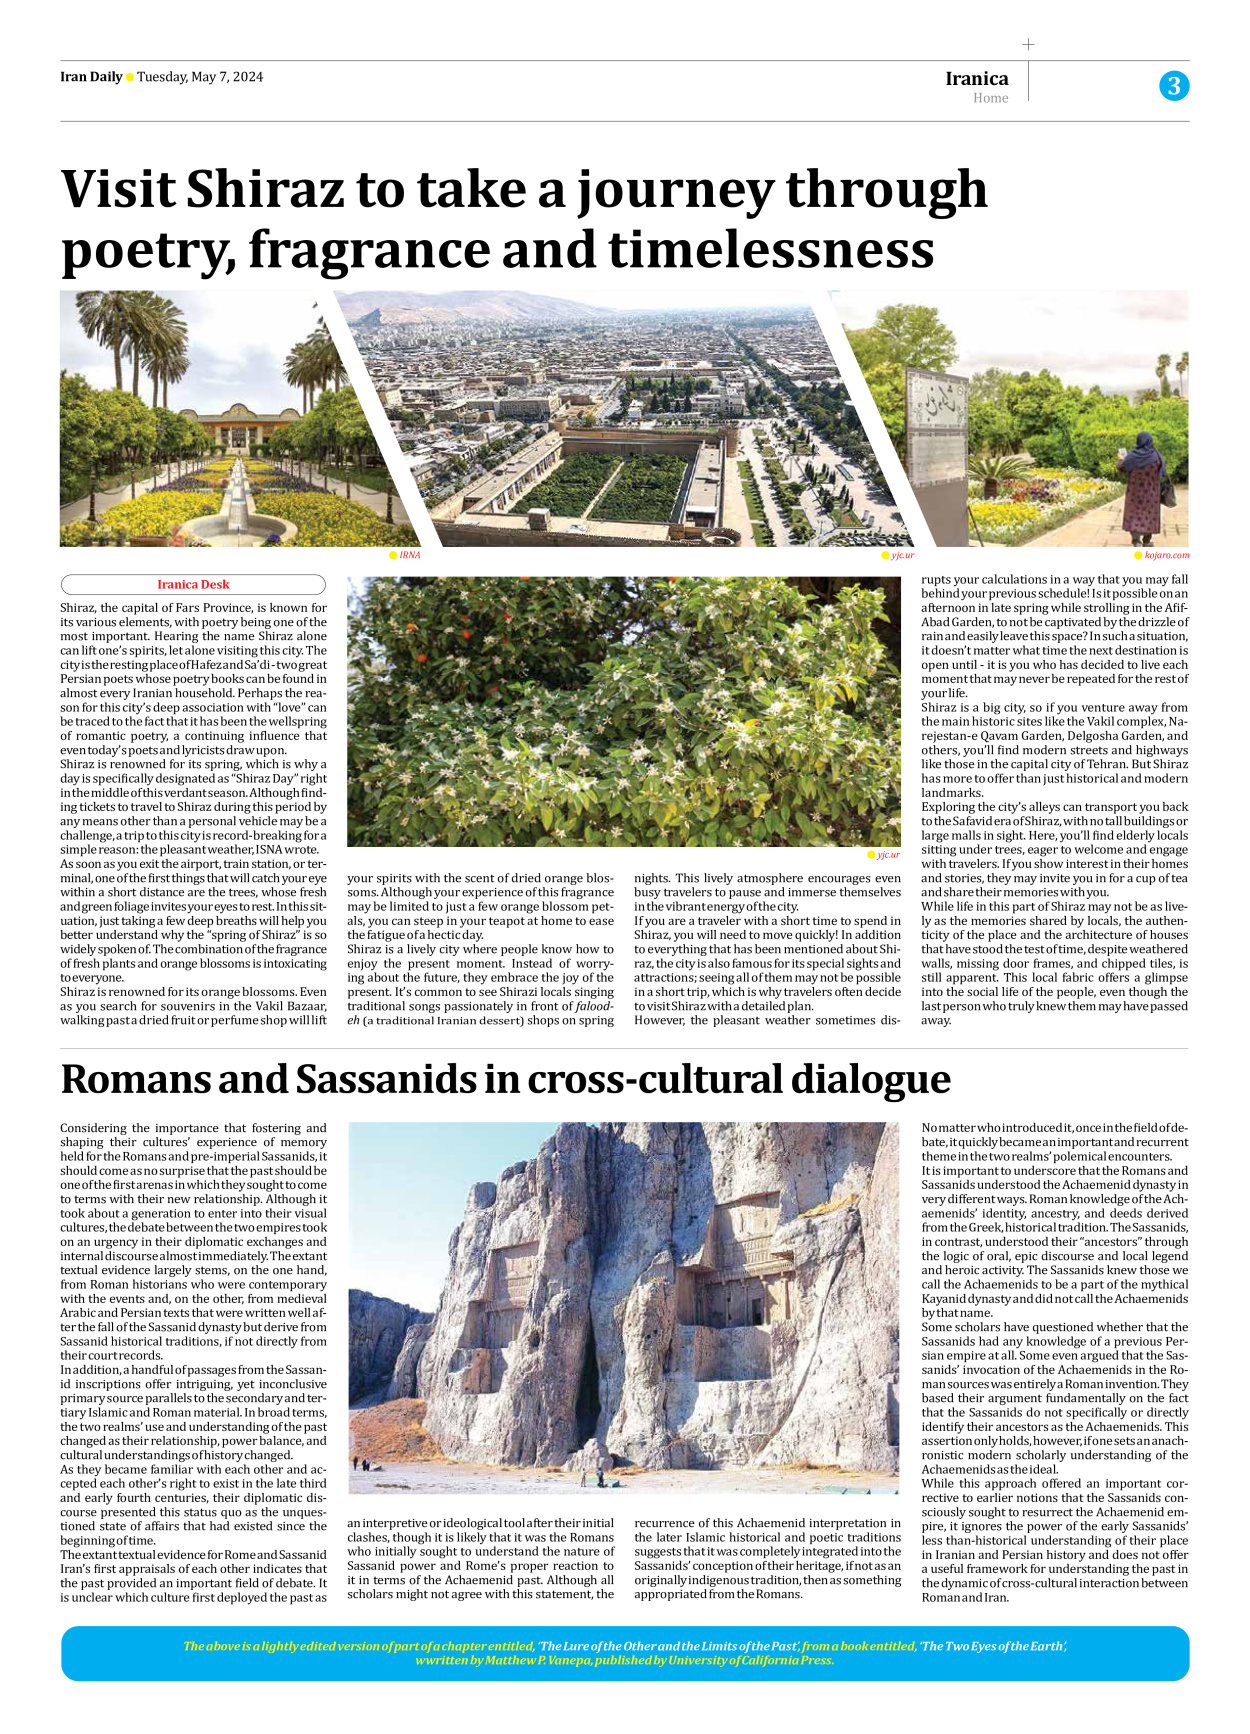 Iran Daily - Number Seven Thousand Five Hundred and Fifty One - 07 May 2024 - Page 3